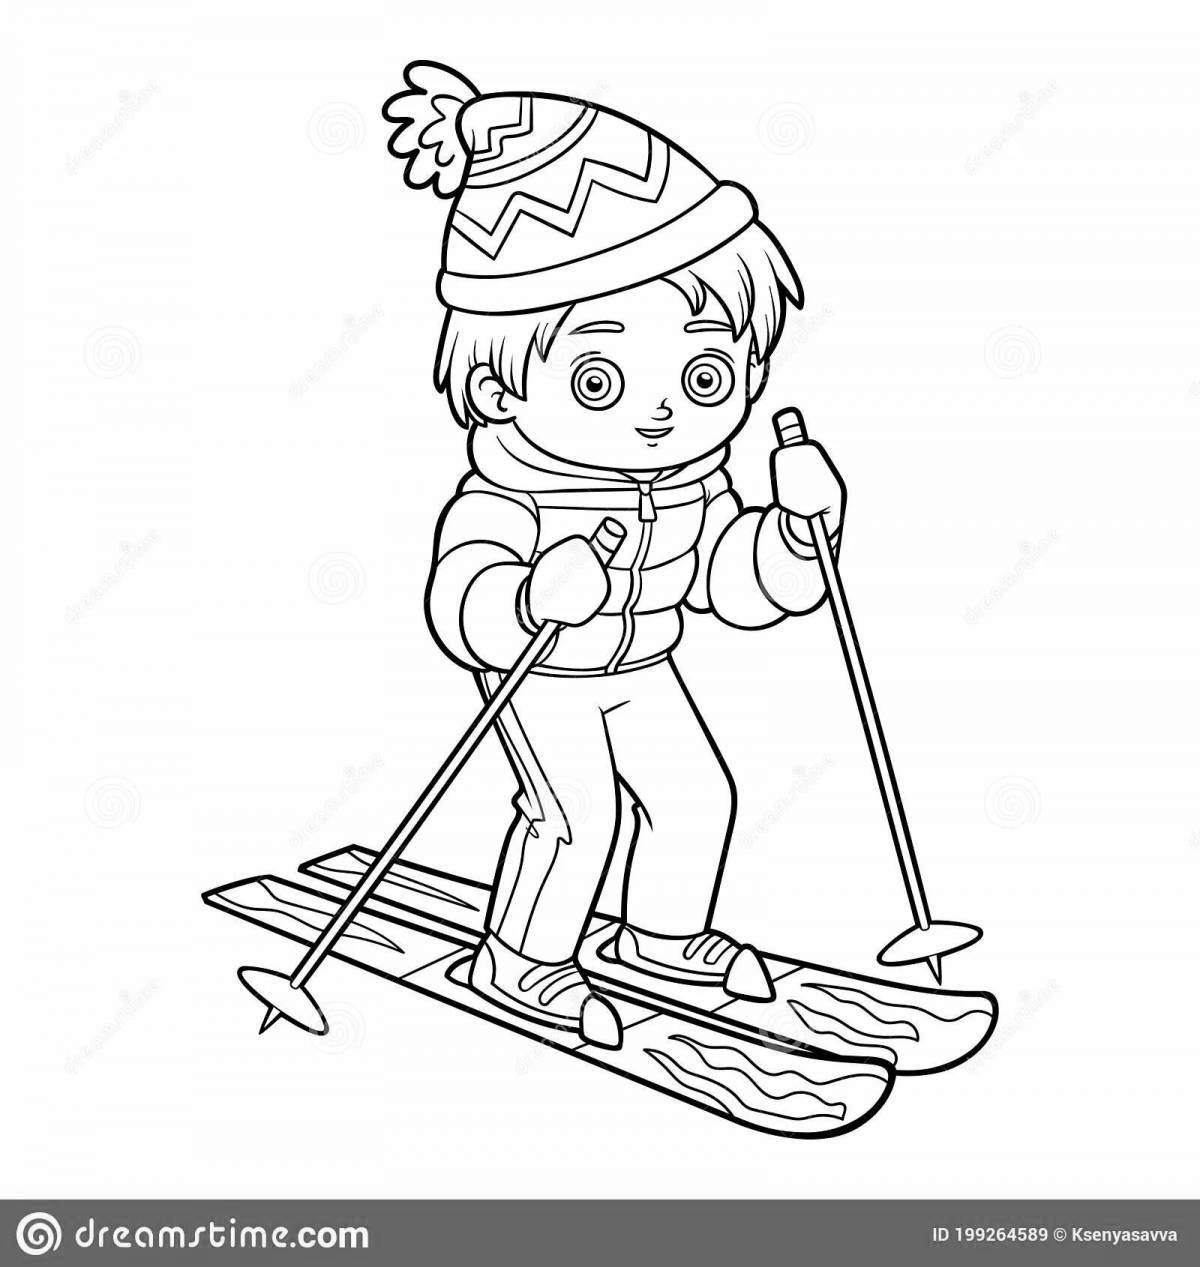 Live person on skis